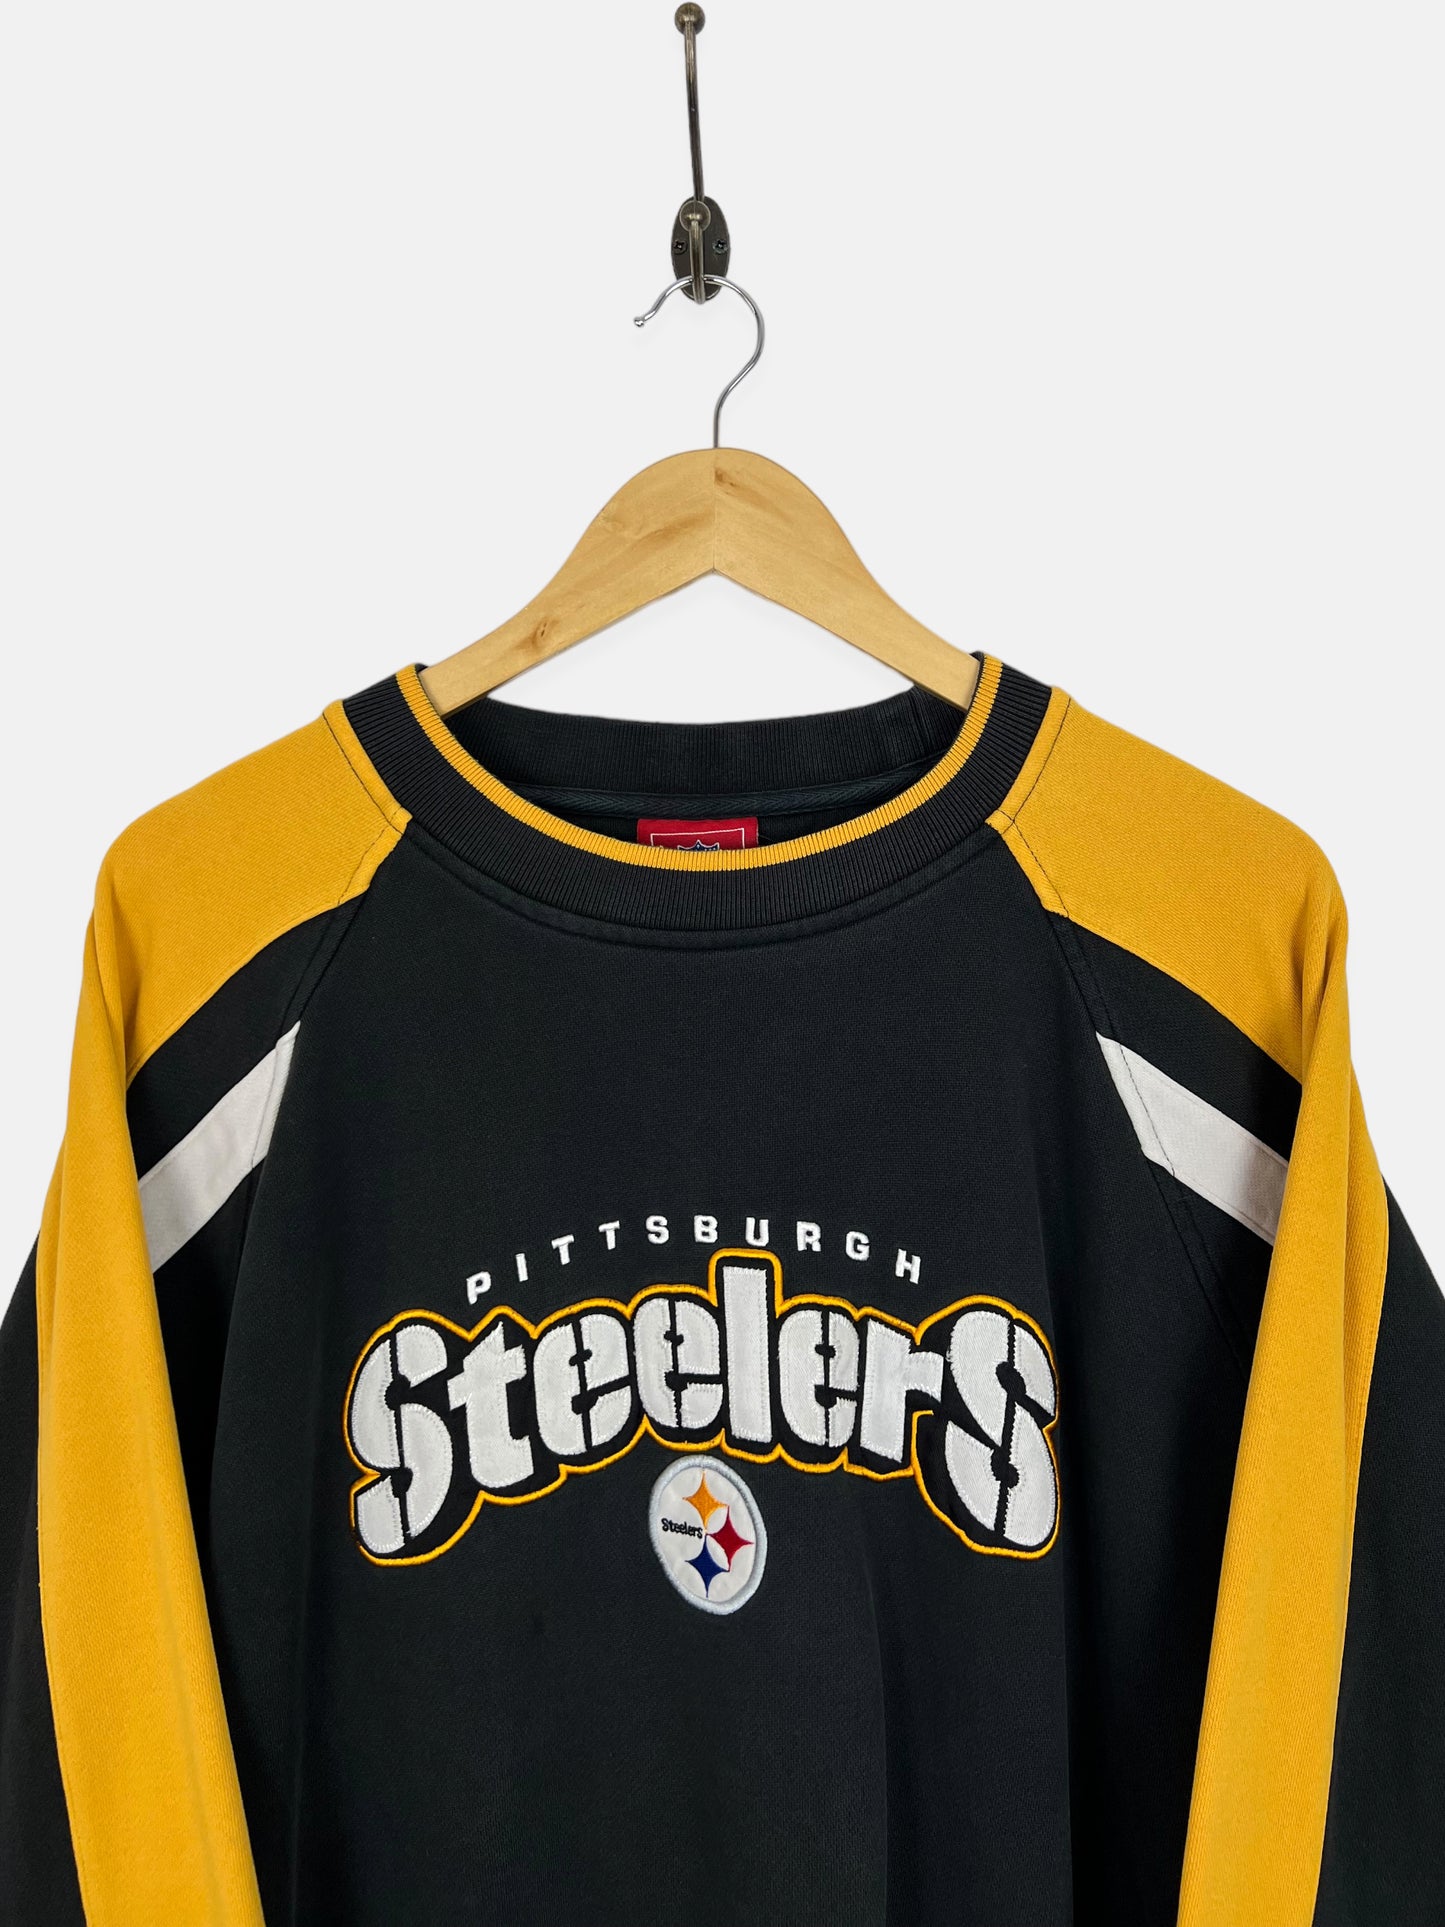 90's Pittsburgh Steelers NFL Embroidered Vintage Sweatshirt Size XL